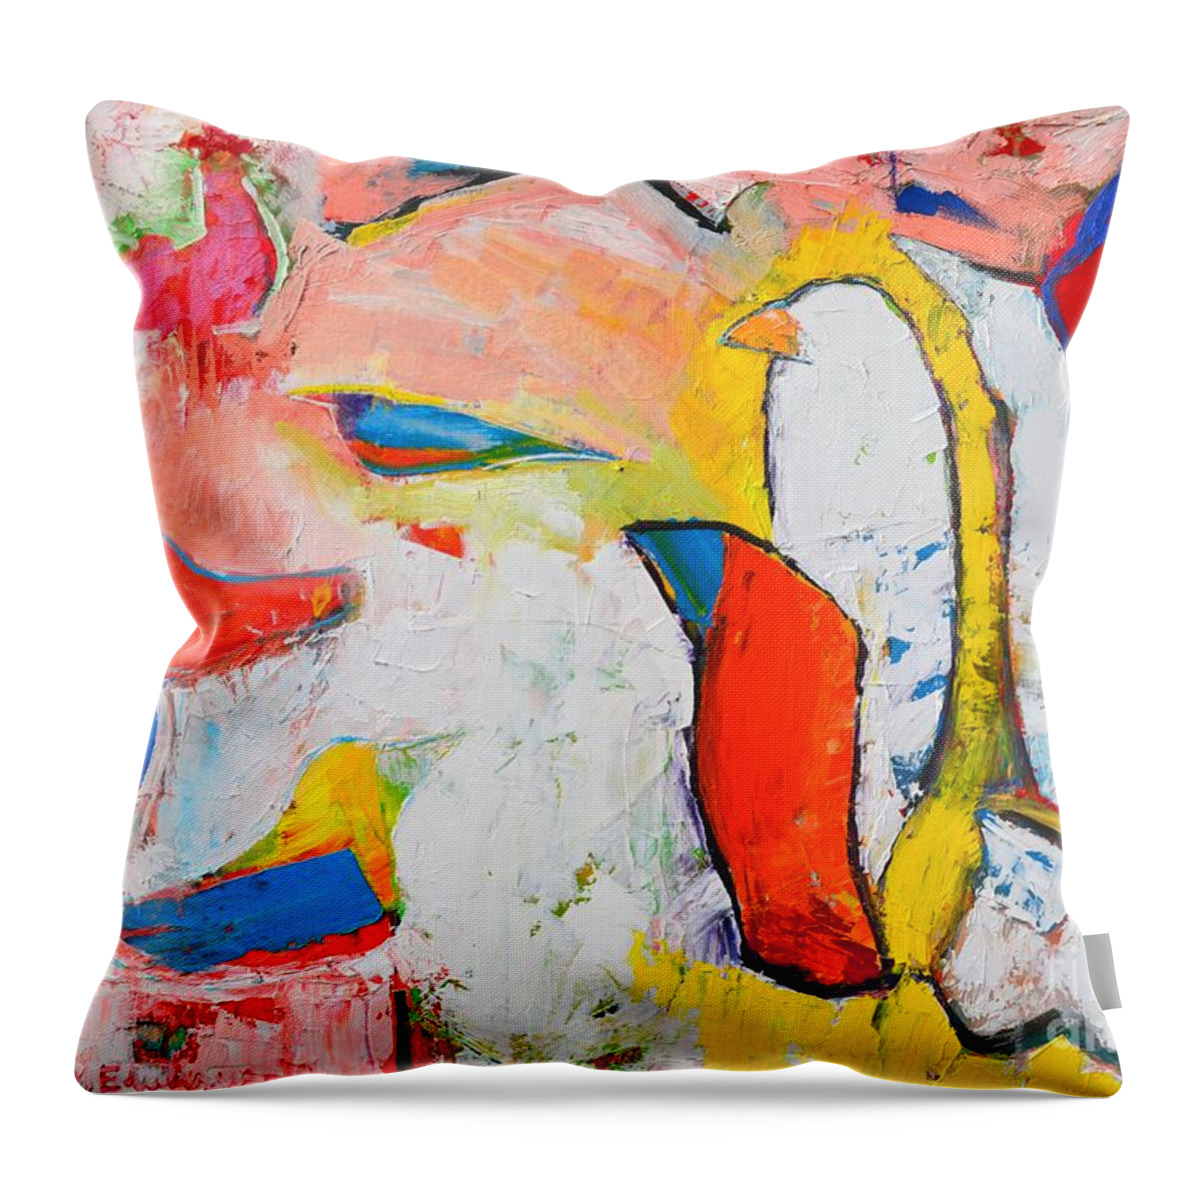 Abstract Throw Pillow featuring the painting Birds In Paradise by Ana Maria Edulescu